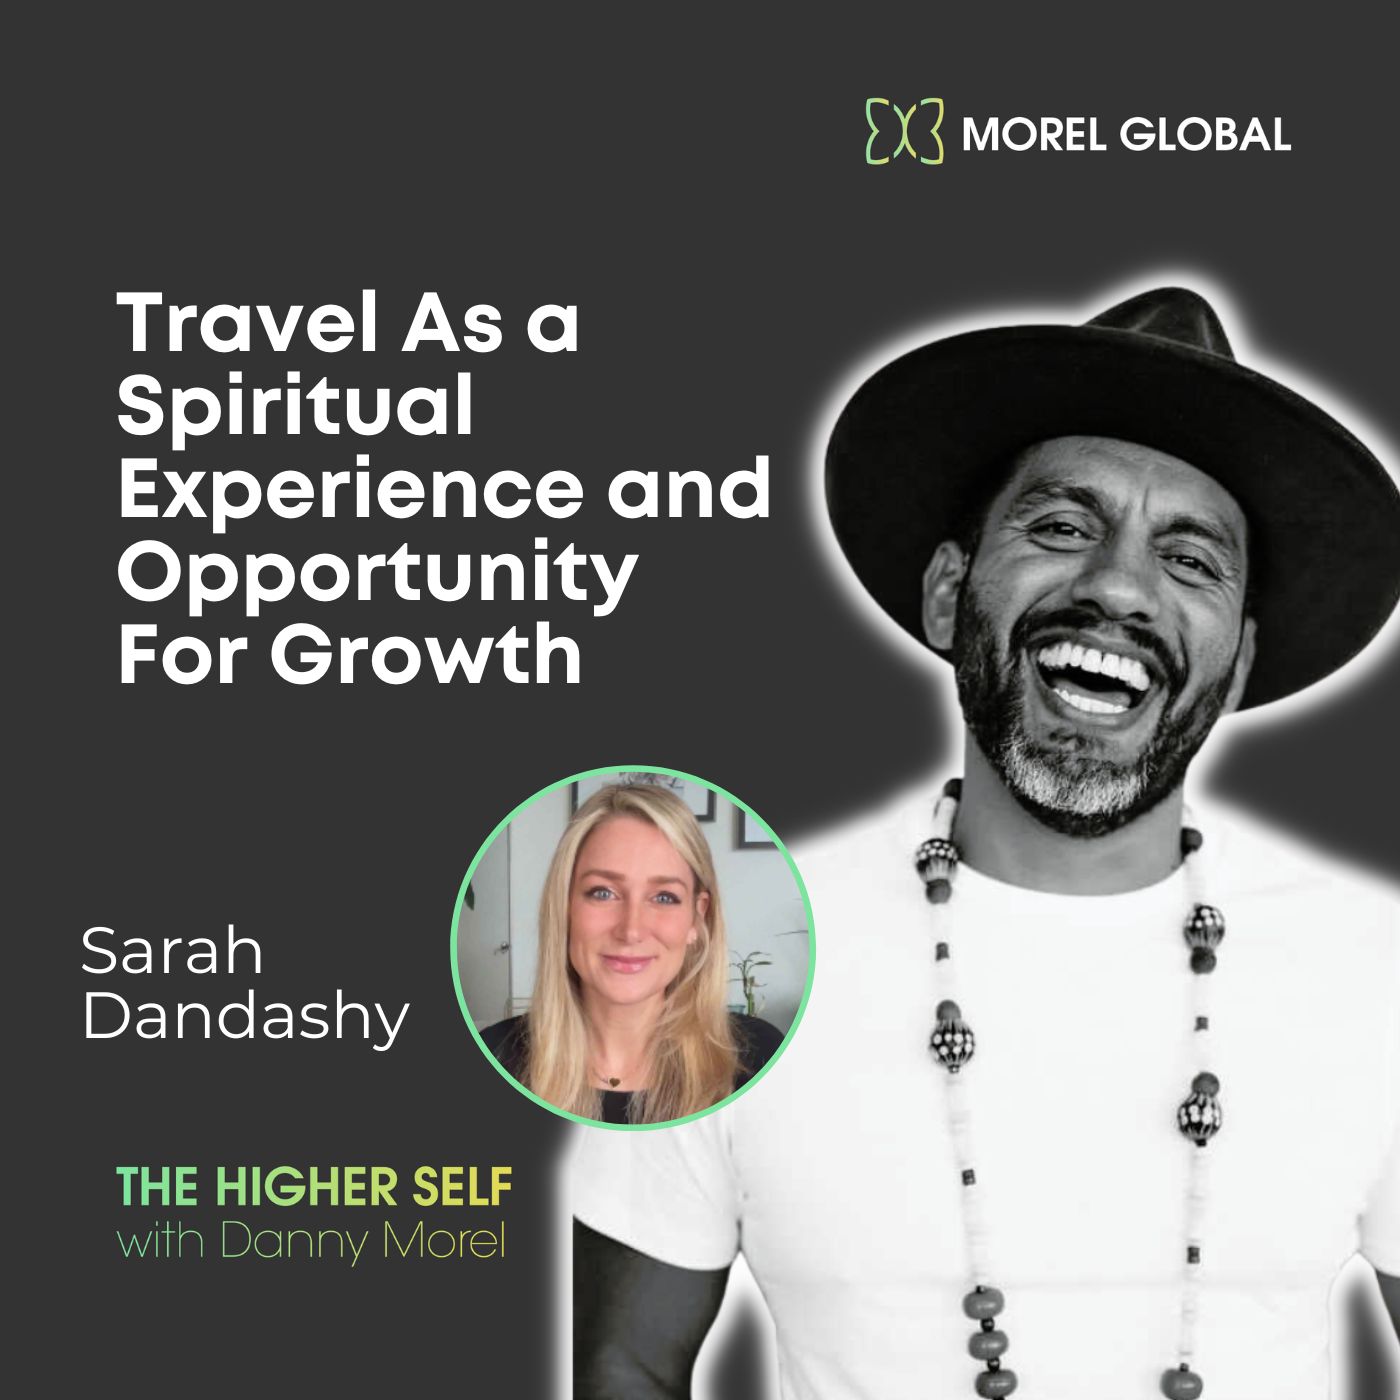 044 Sarah Dandashy - Travel As a Spiritual Experience and Opportunity For Growth